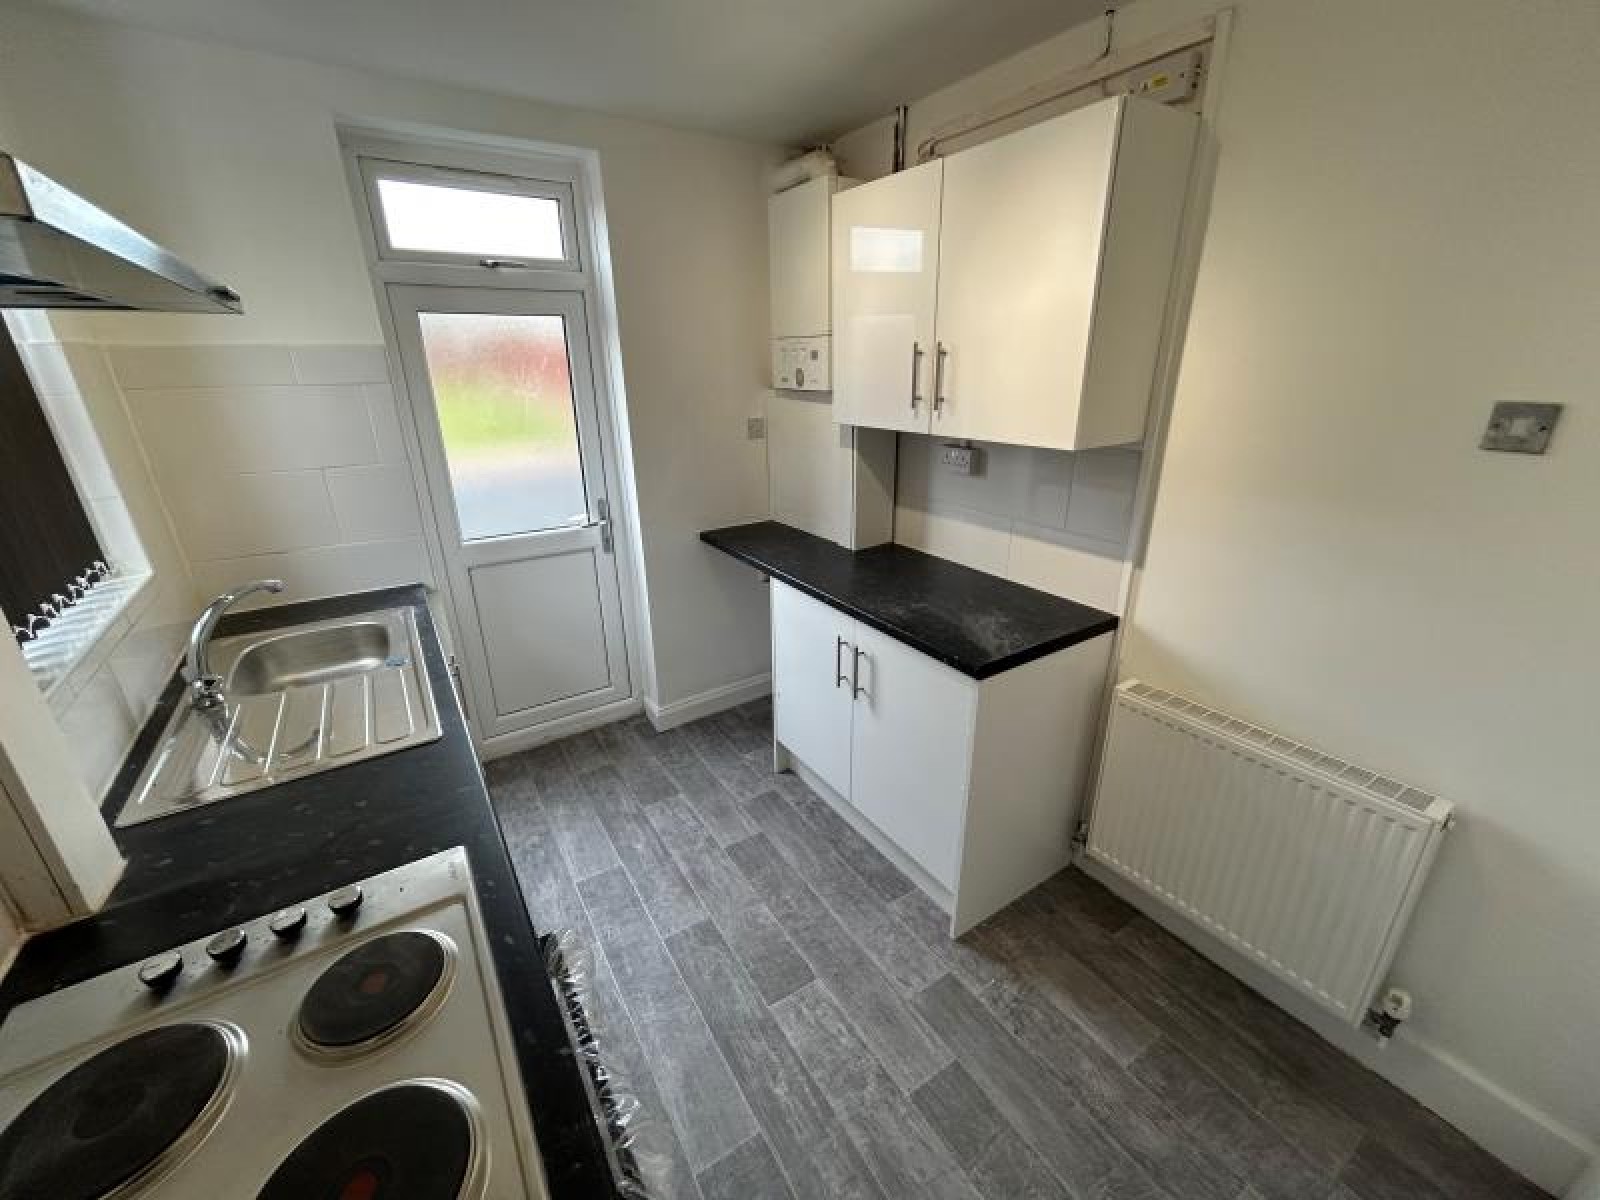 Images for Arnold Avenue, Coventry, Cv3 5lx